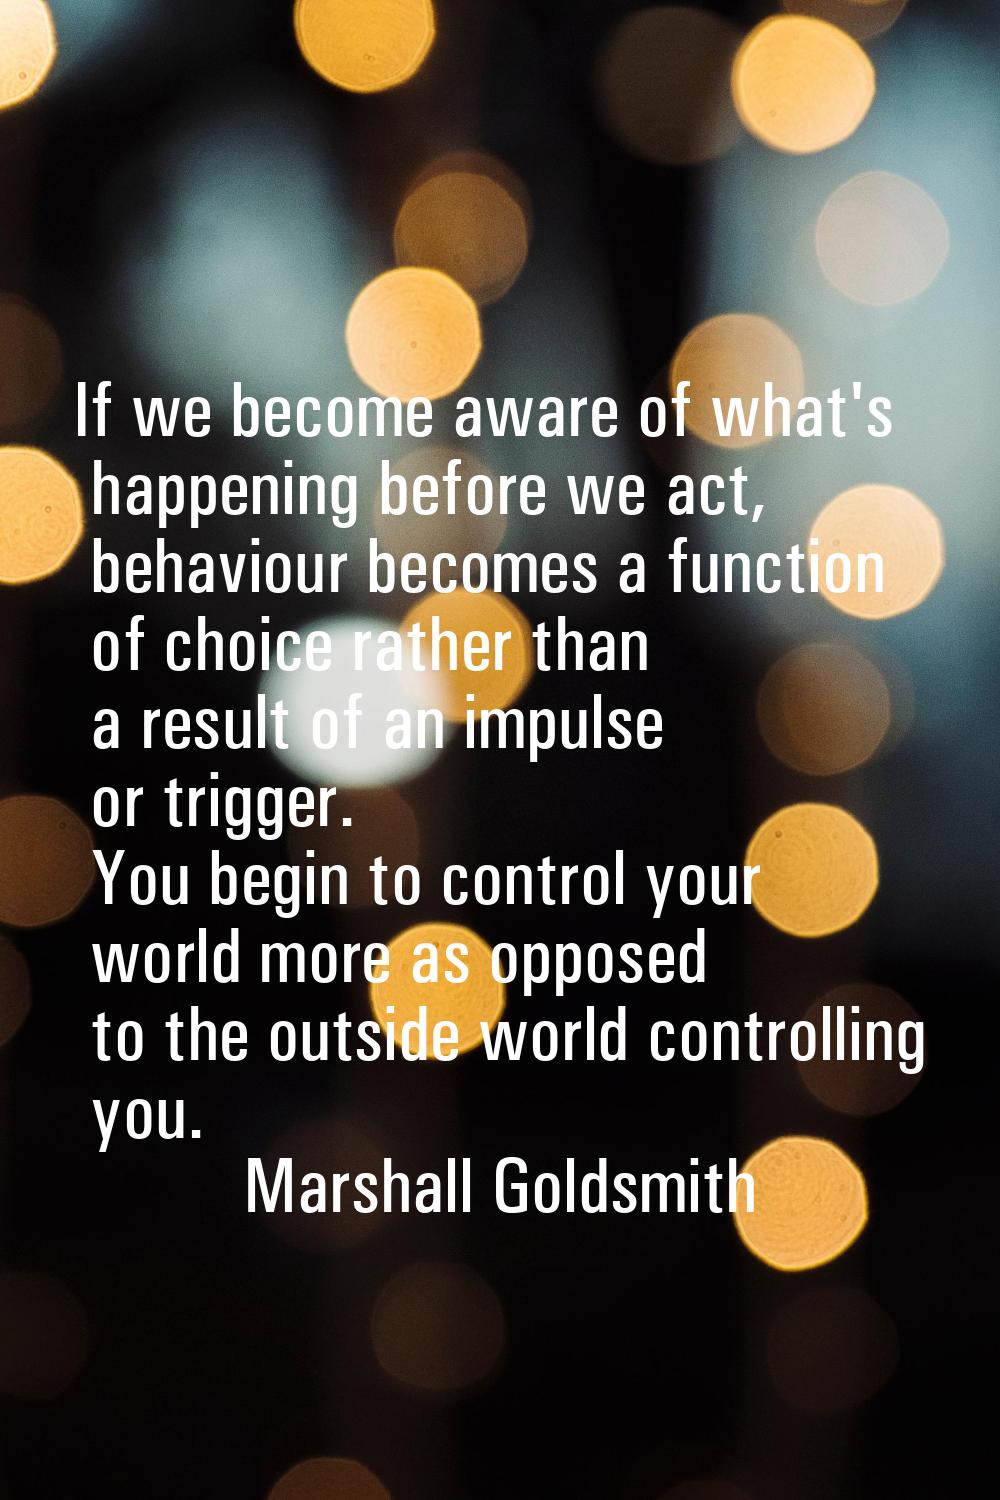 If we become aware of what's happening before we act, behaviour becomes a function of choice rather